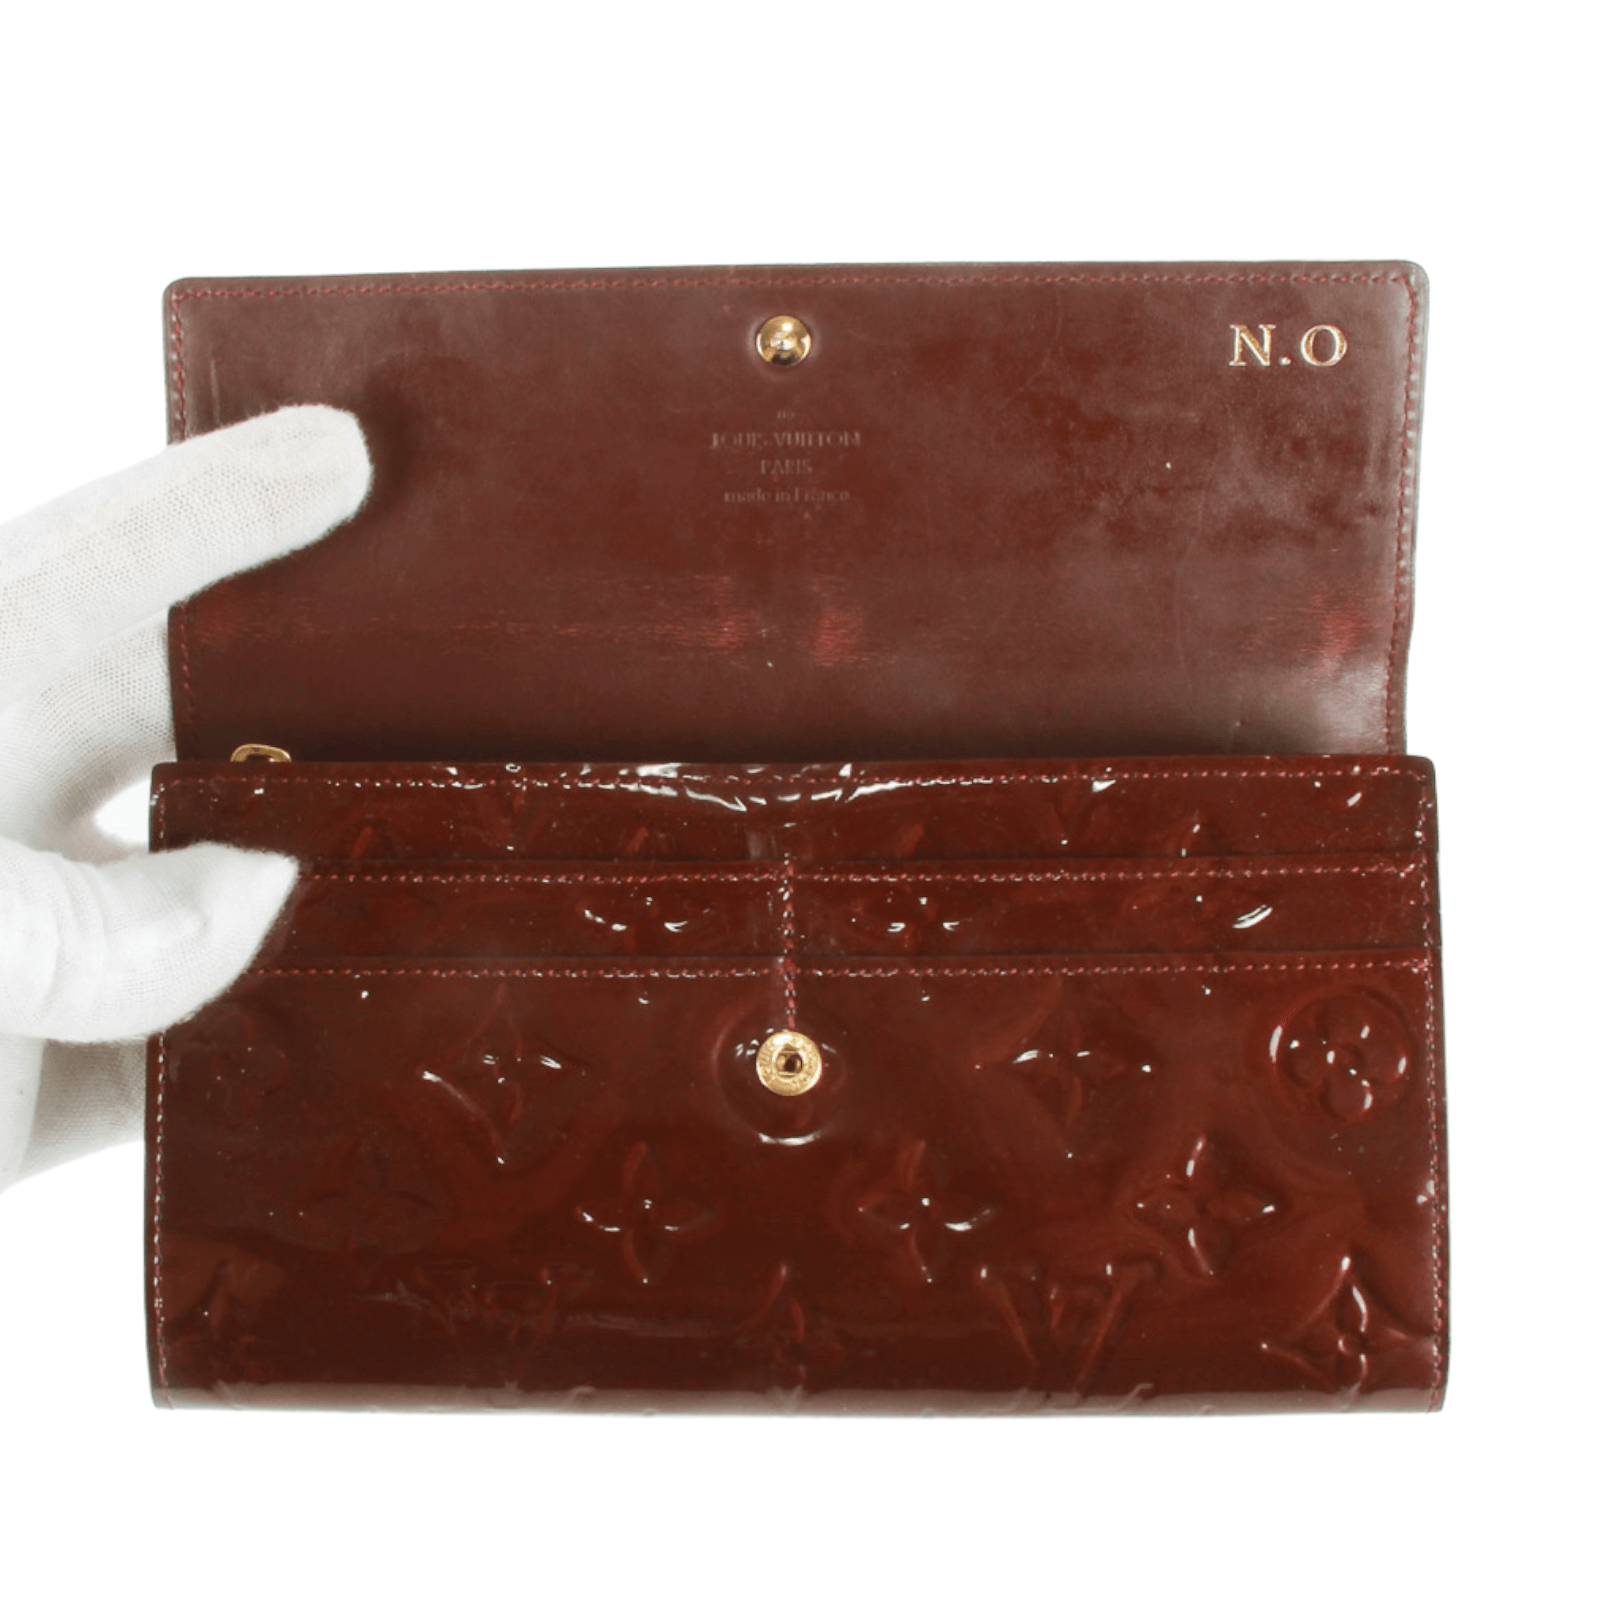 Louis Vuitton Monogram Vernis Patent Leather Wine Continental Wallet One Size